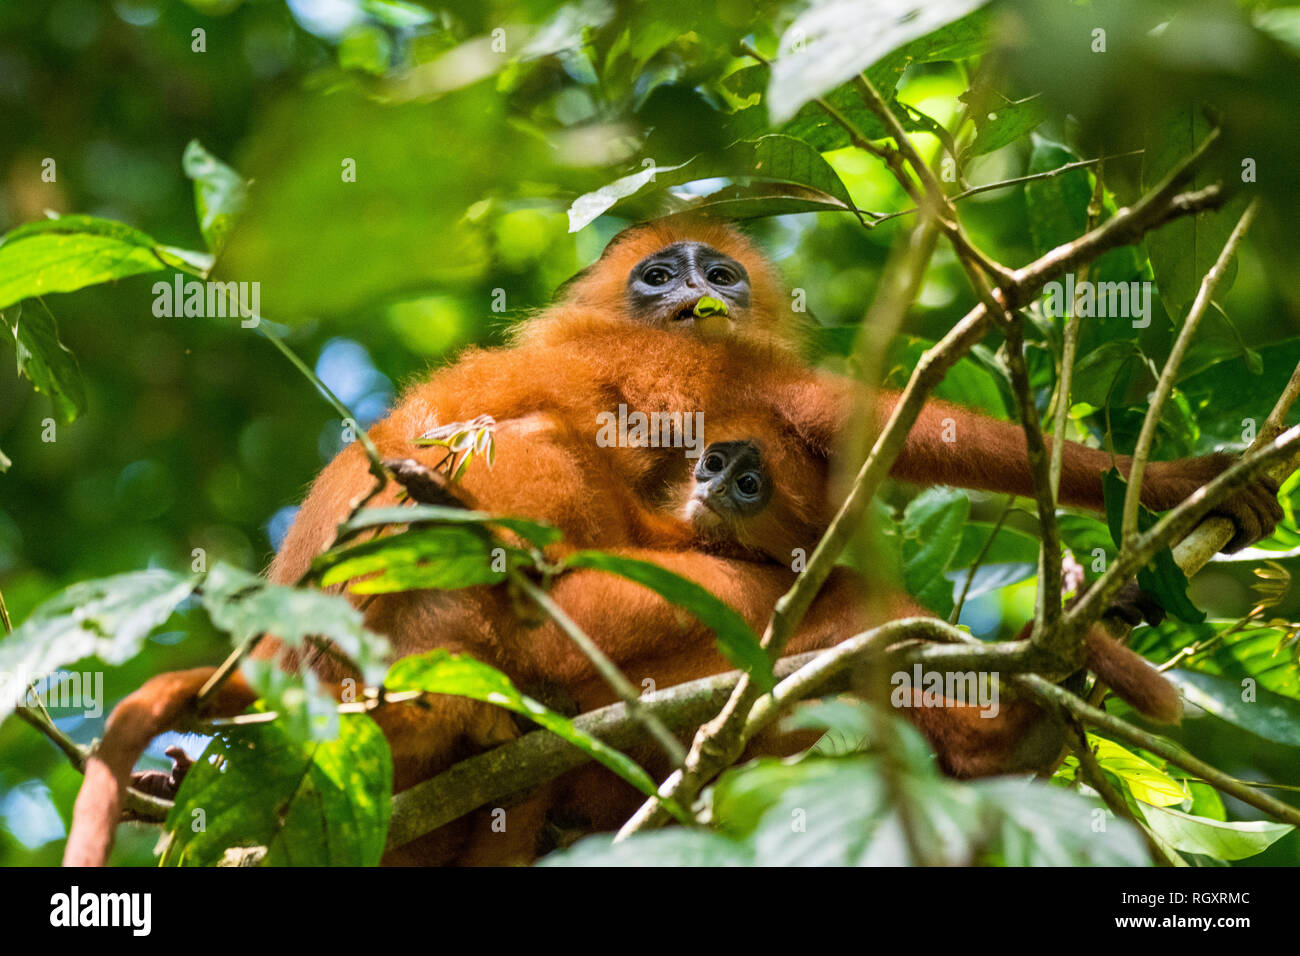 A red leaf monkey (maroon langur) mother and baby resting in a tree, in Danum Valley Rainforest, Sabah, Borneo, Malaysia. Stock Photo